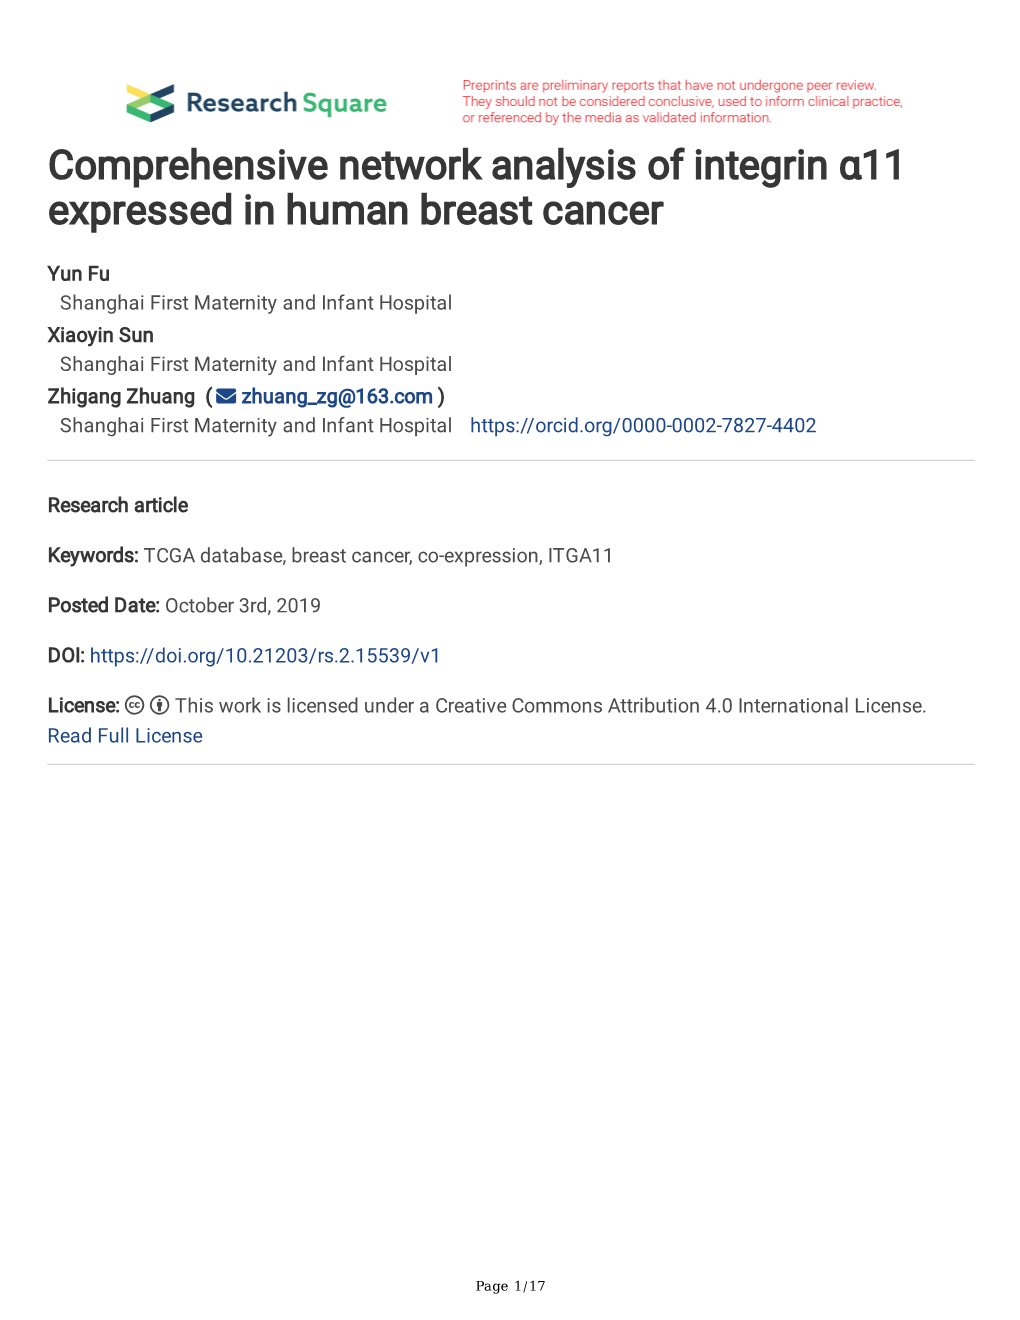 Comprehensive Network Analysis of Integrin Α11 Expressed in Human Breast Cancer